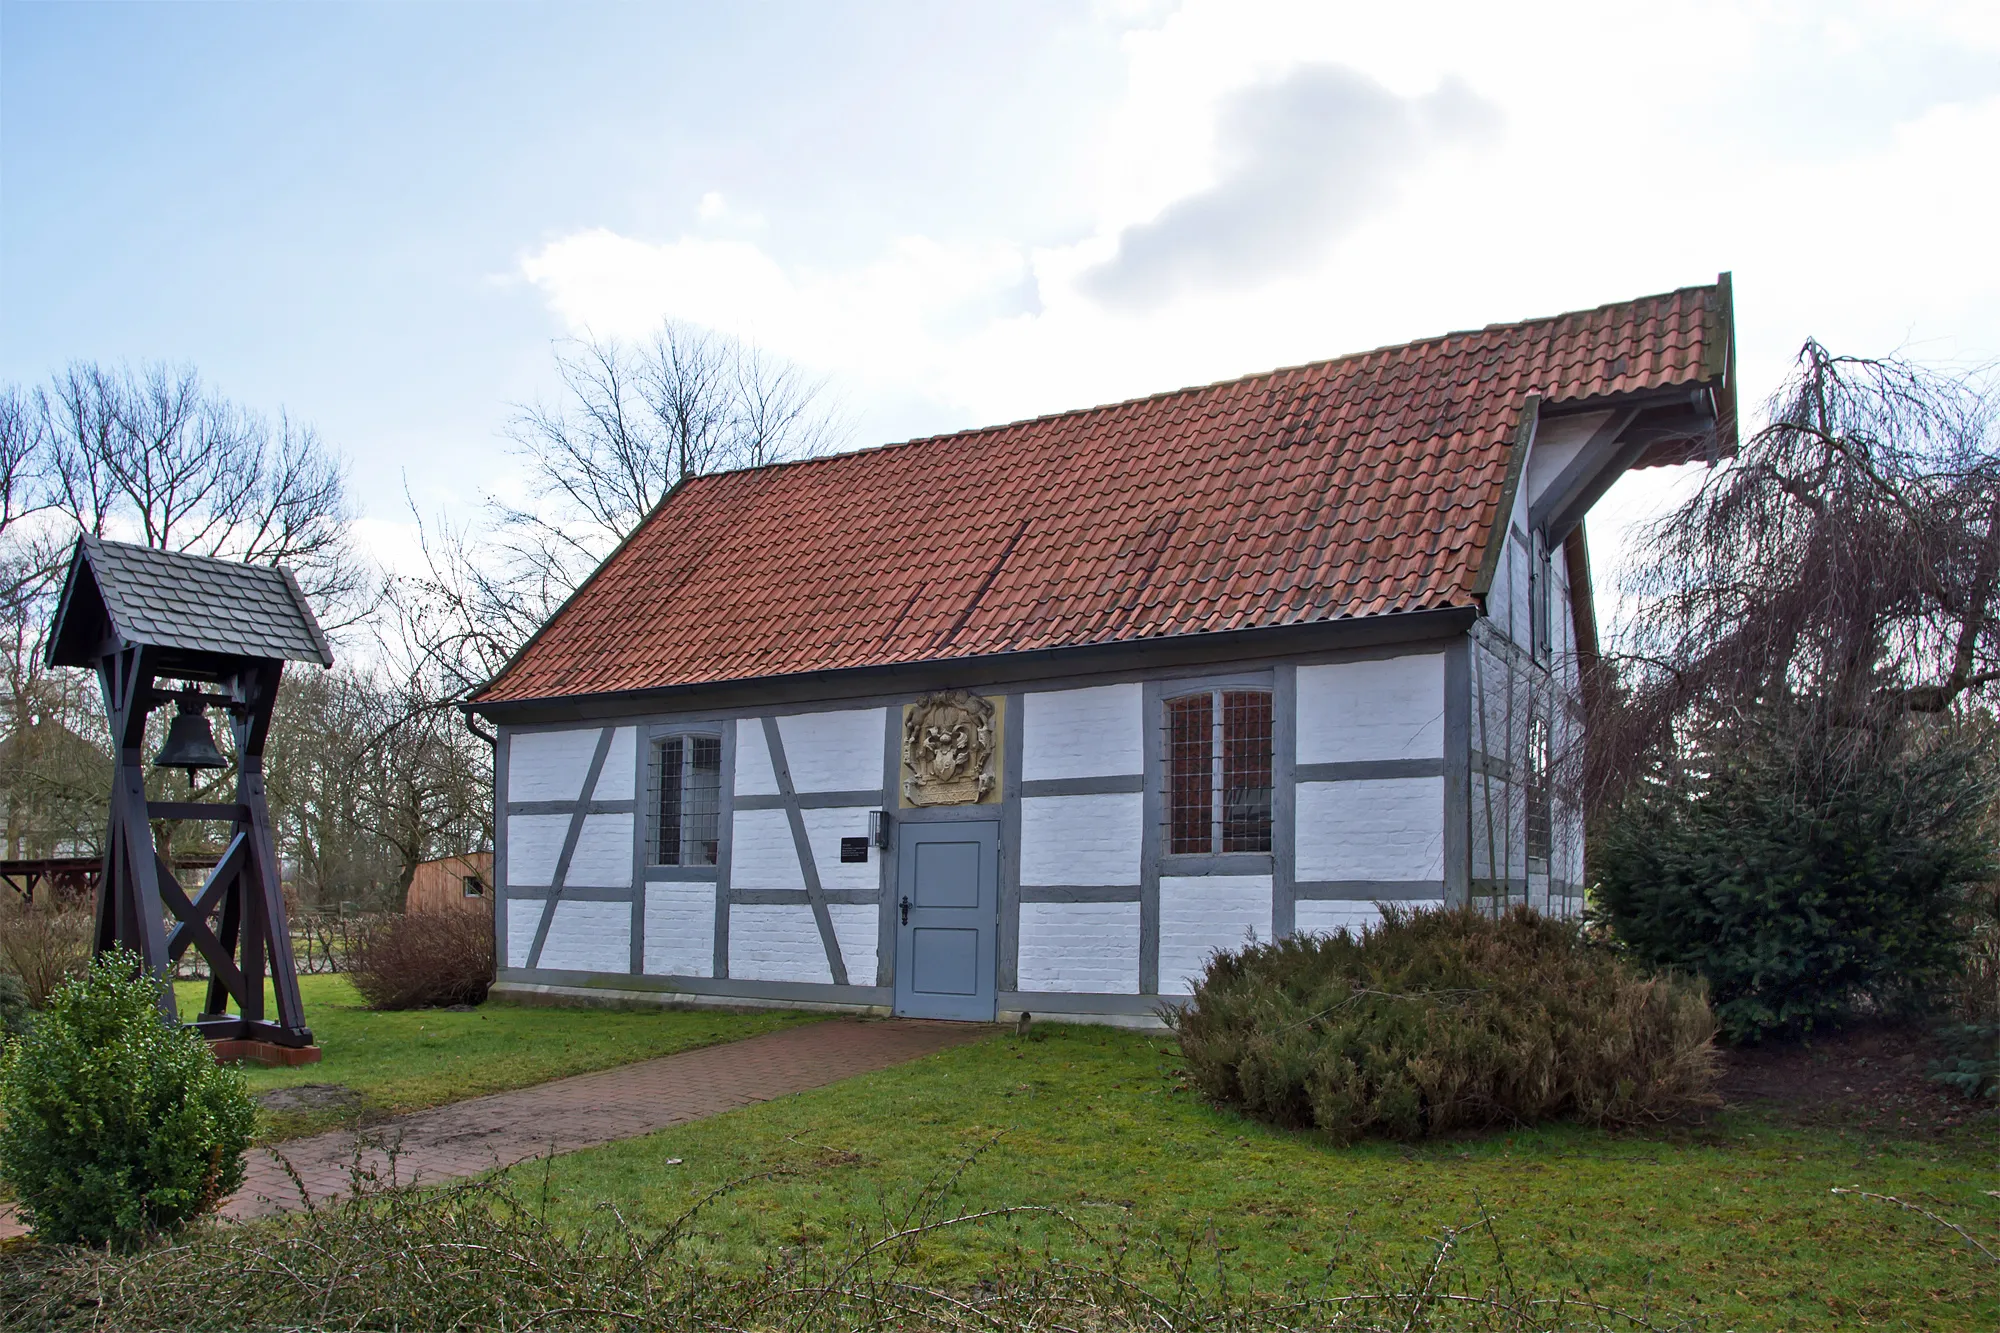 Photo showing: Chapel of the village Kolborn near Lüchow (district Lüchow-Dannenberg, northern Germany).